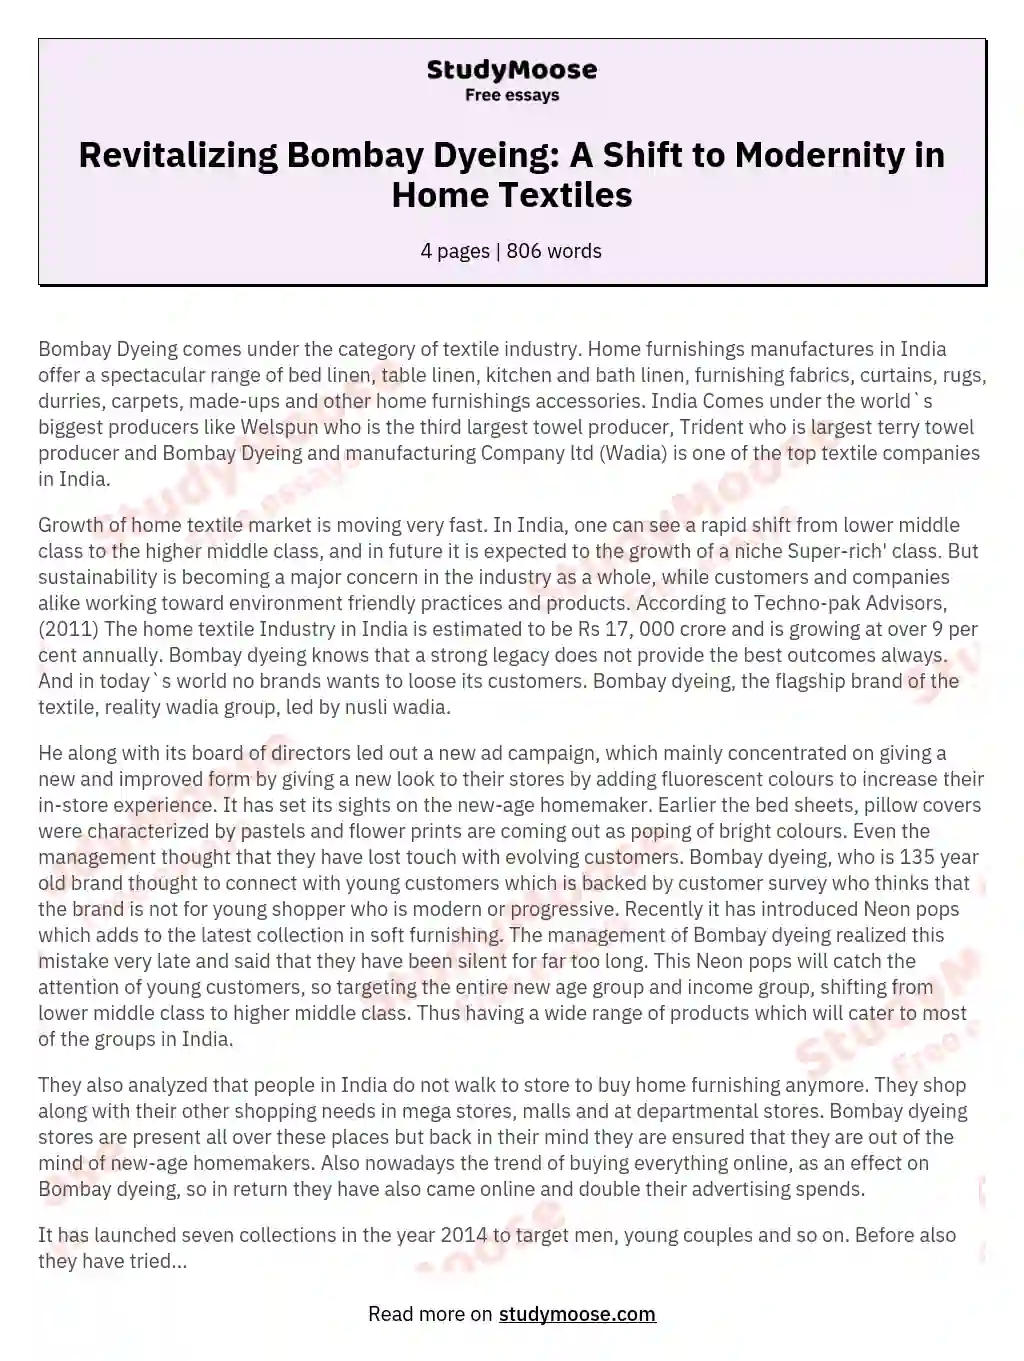 Revitalizing Bombay Dyeing: A Shift to Modernity in Home Textiles essay